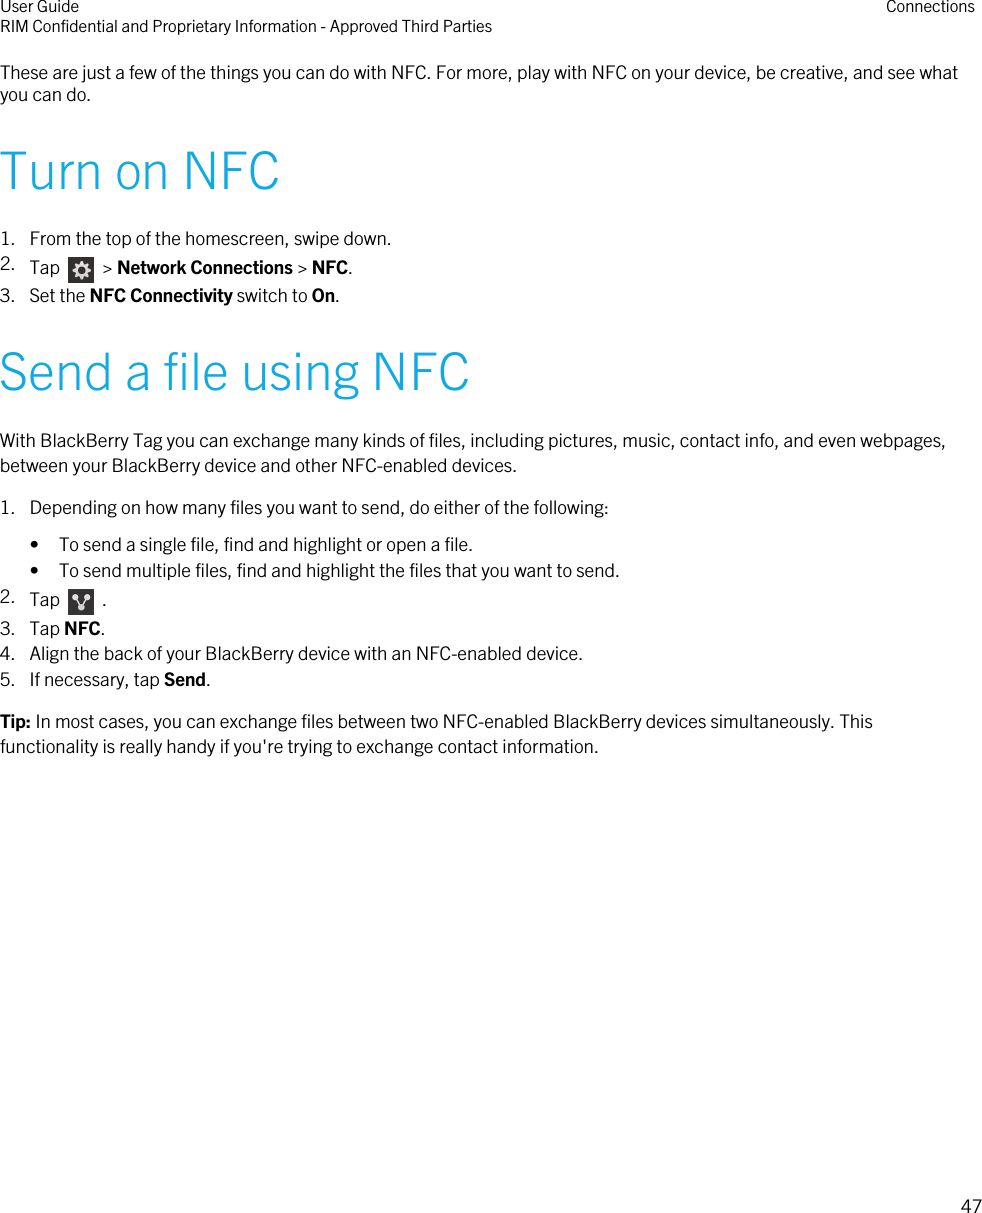 These are just a few of the things you can do with NFC. For more, play with NFC on your device, be creative, and see whatyou can do.Turn on NFC1. From the top of the homescreen, swipe down.2. Tap    &gt; Network Connections &gt; NFC.3. Set the NFC Connectivity switch to On.Send a file using NFCWith BlackBerry Tag you can exchange many kinds of files, including pictures, music, contact info, and even webpages,between your BlackBerry device and other NFC-enabled devices.1. Depending on how many files you want to send, do either of the following:• To send a single file, find and highlight or open a file.• To send multiple files, find and highlight the files that you want to send.2. Tap    .3. Tap NFC.4. Align the back of your BlackBerry device with an NFC-enabled device.5. If necessary, tap Send.Tip: In most cases, you can exchange files between two NFC-enabled BlackBerry devices simultaneously. Thisfunctionality is really handy if you&apos;re trying to exchange contact information.User GuideRIM Confidential and Proprietary Information - Approved Third Parties Connections47